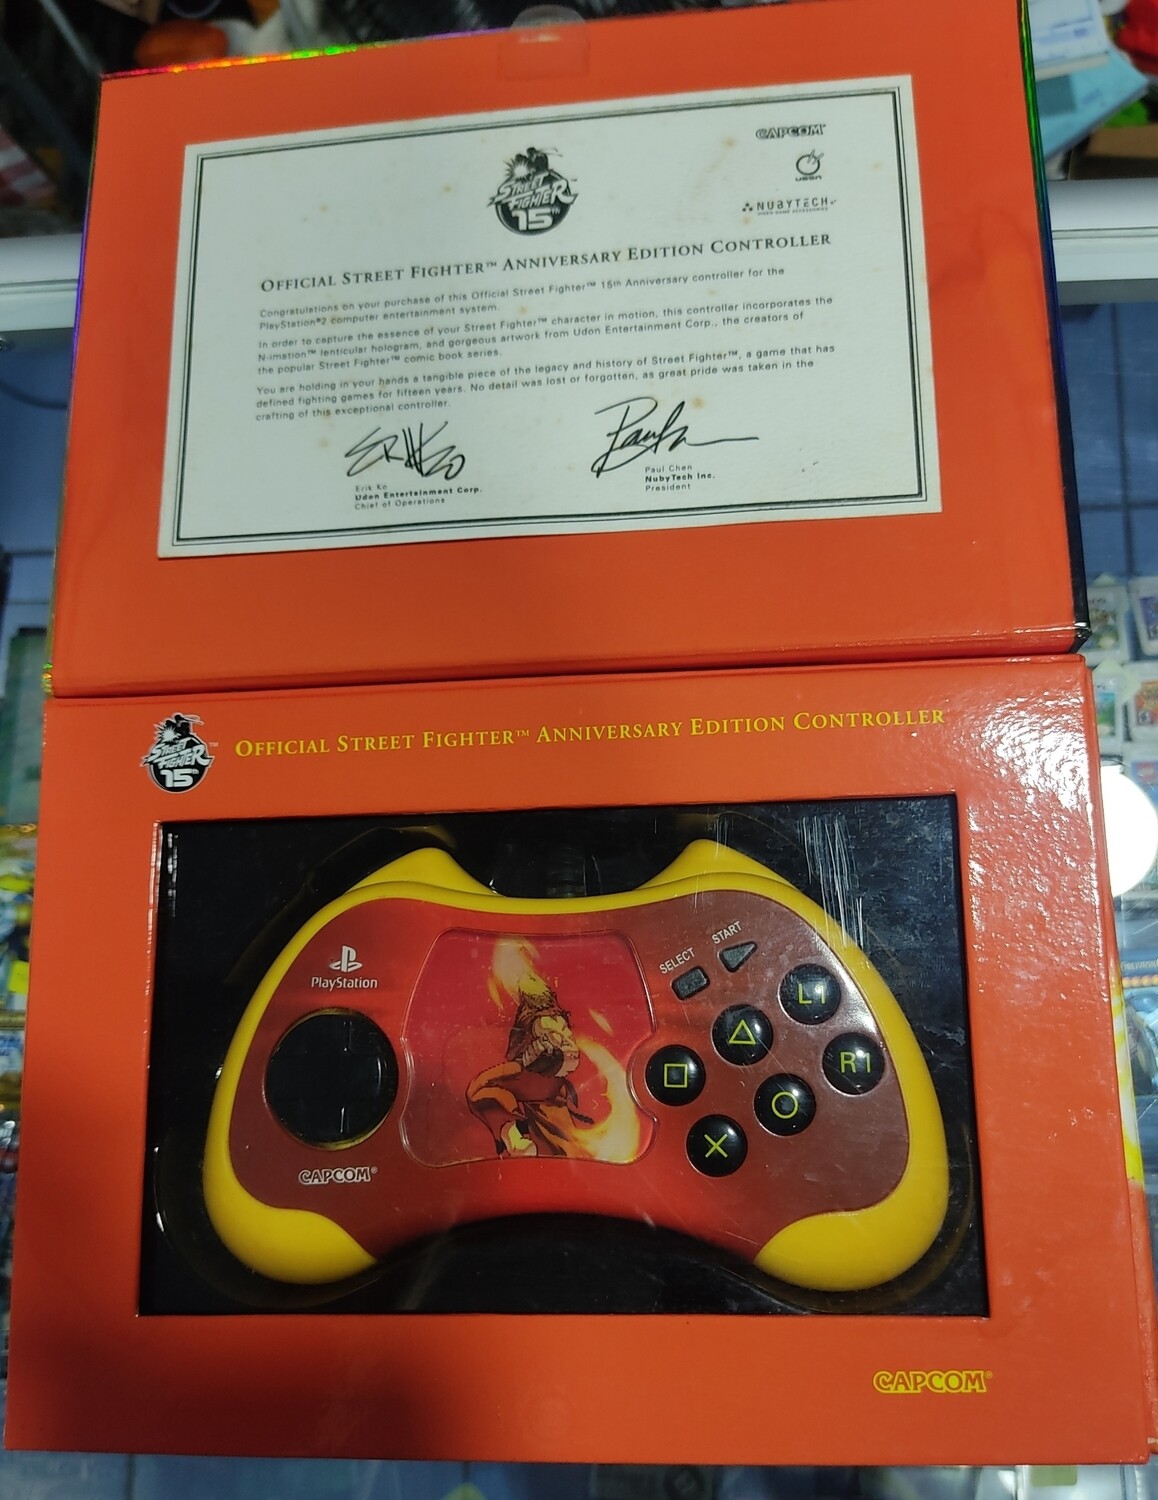 TS Oficial Street Fighter Anniversary Edition Controller Playstation 2 Control